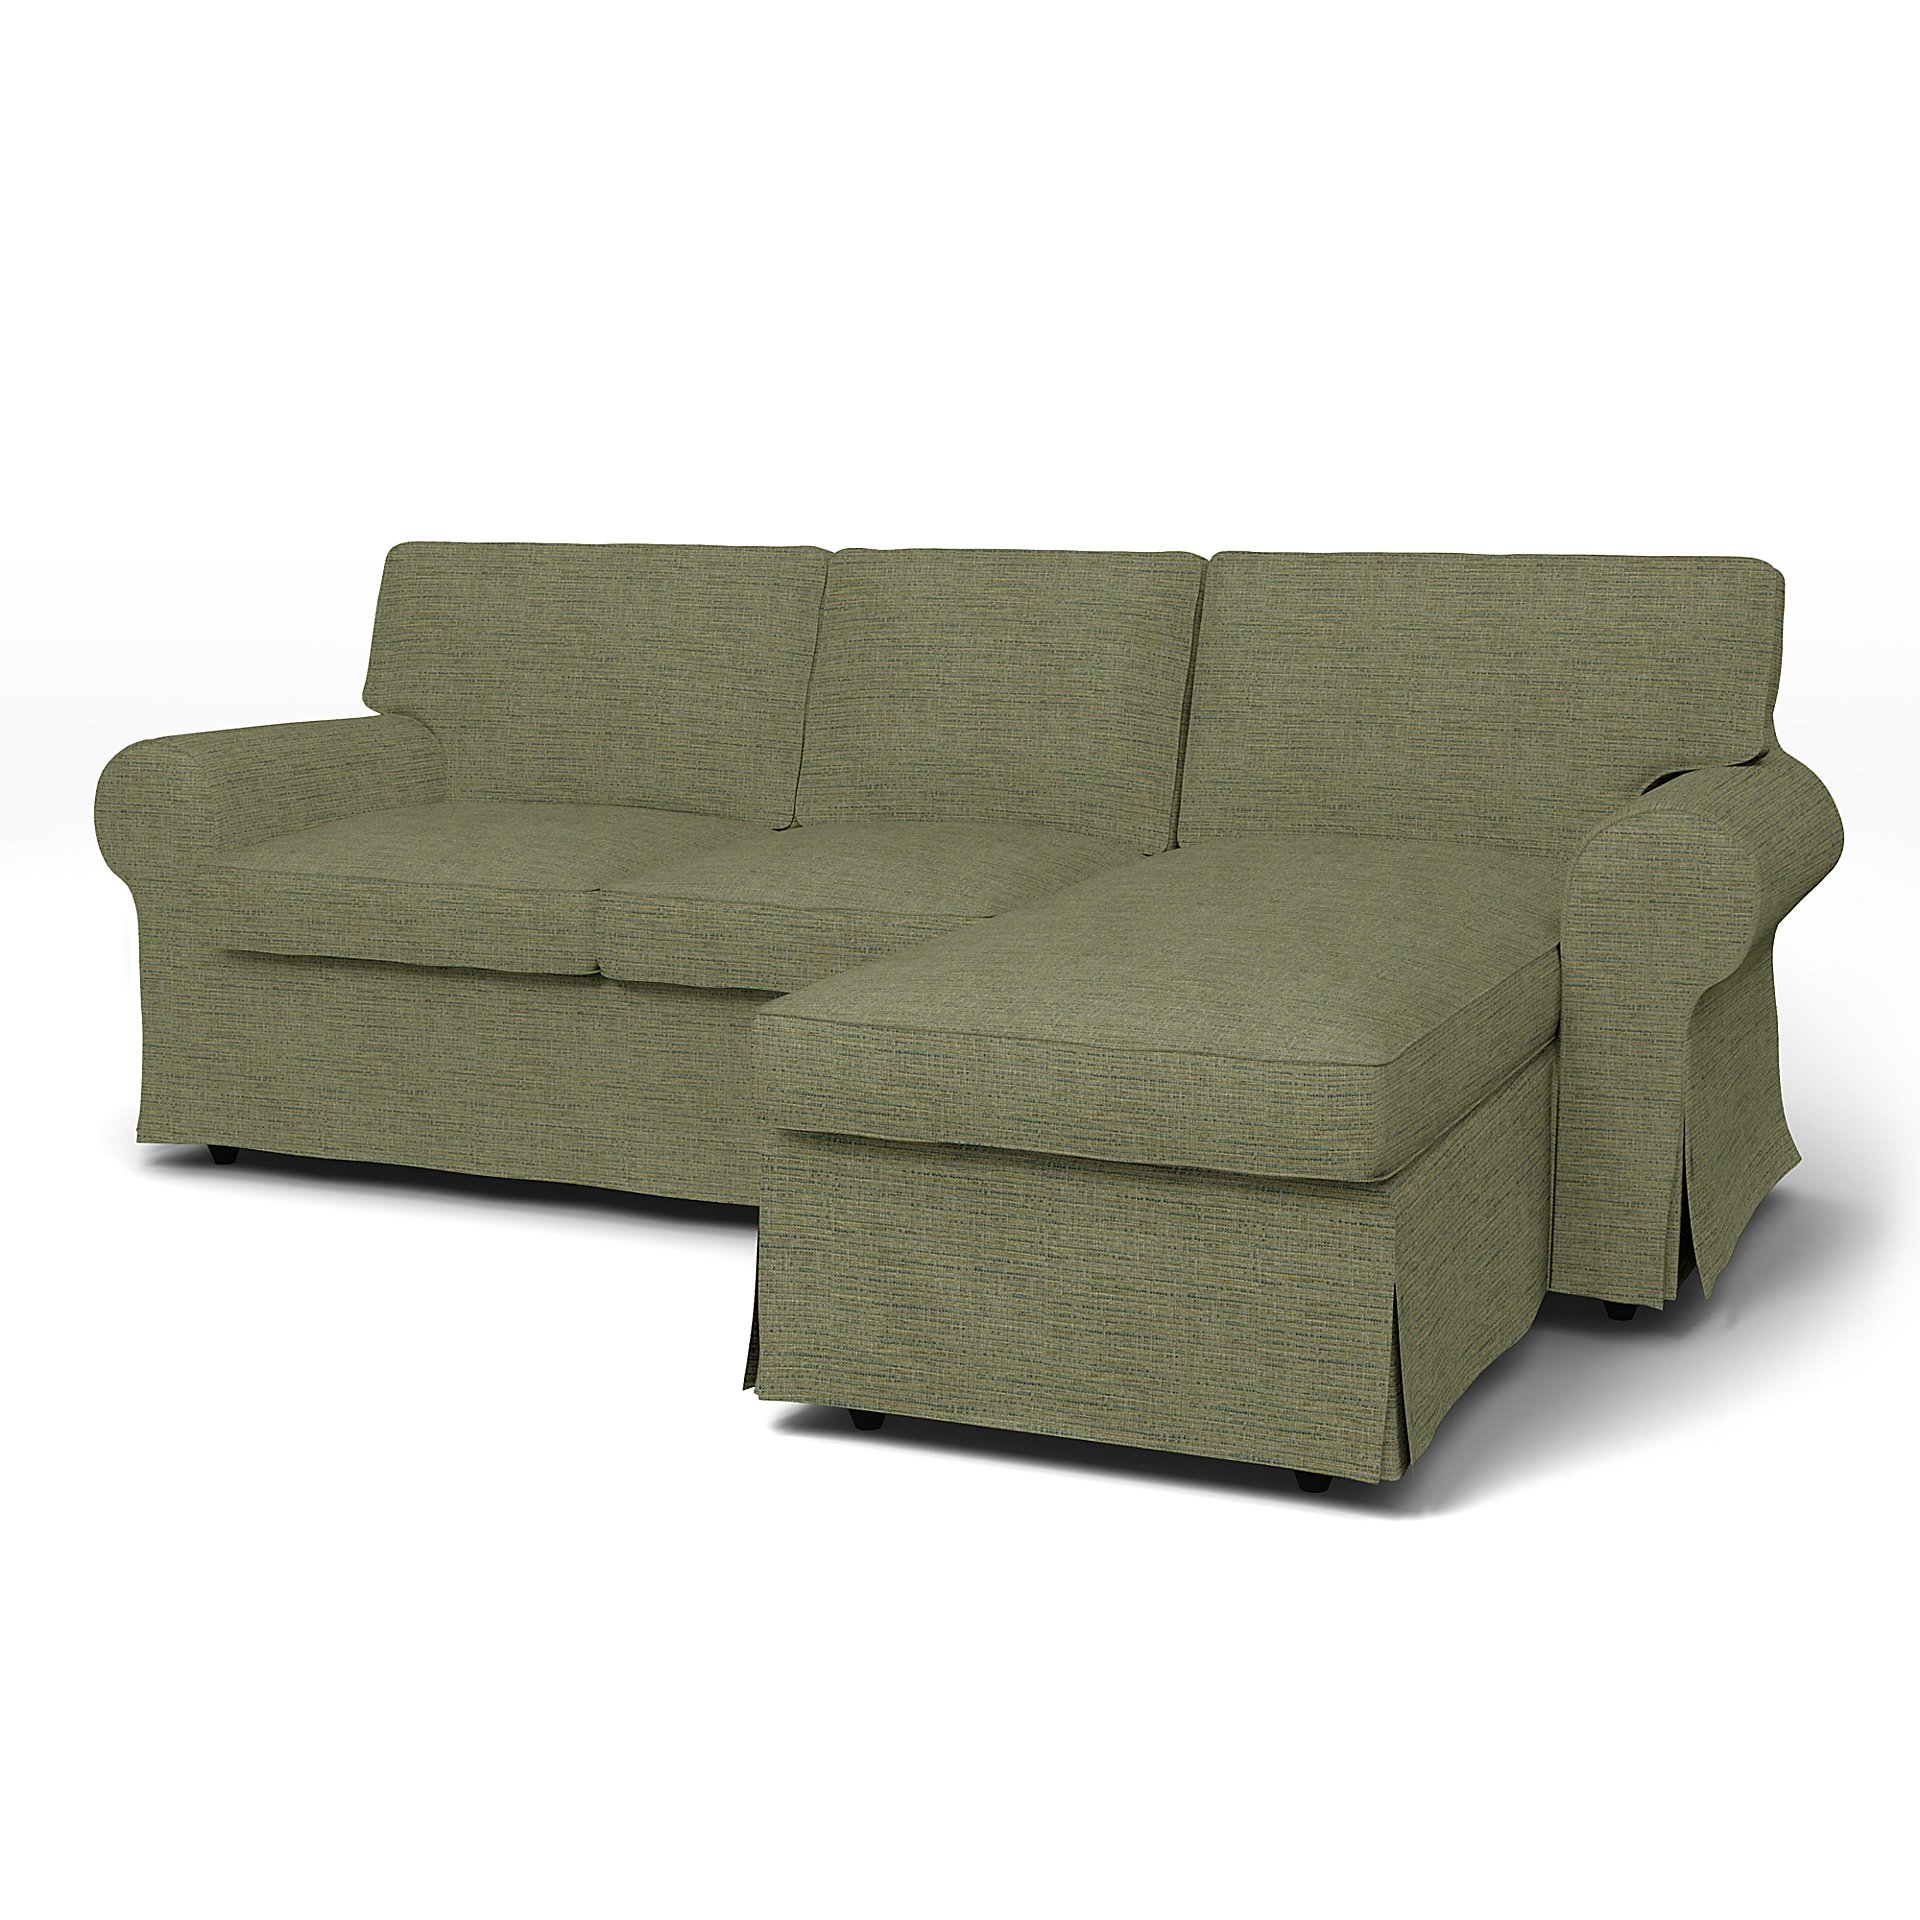 IKEA - Ektorp 3 Seater Sofa with Chaise Cover, Meadow Green, Boucle & Texture - Bemz